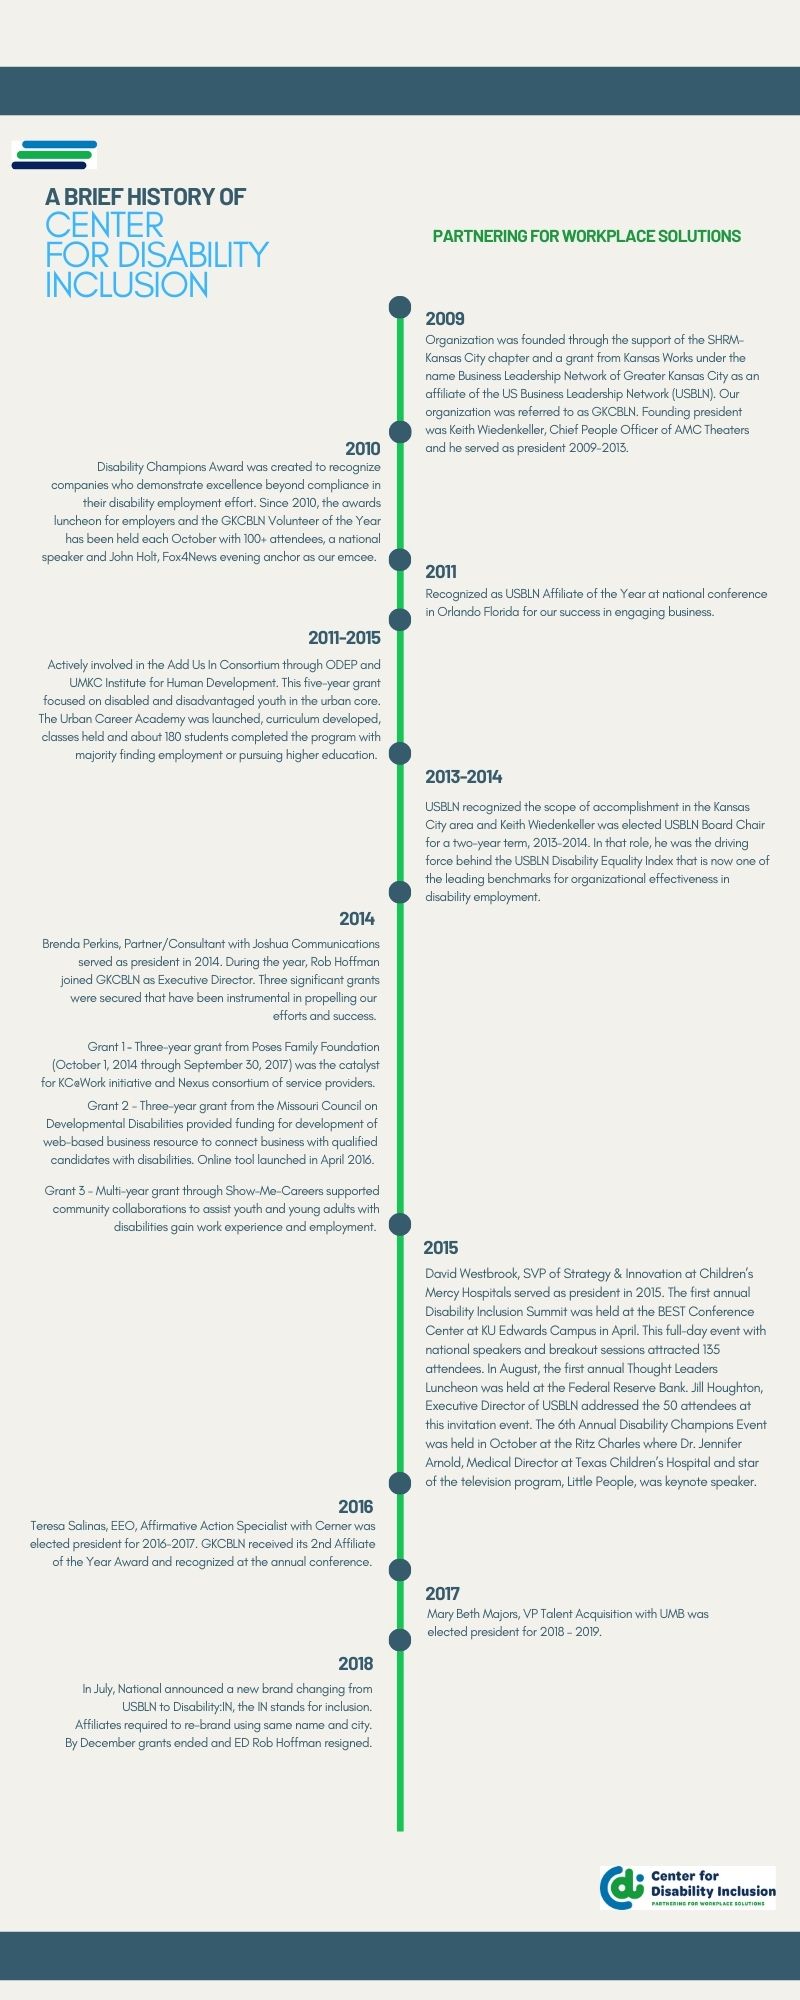 Graphic of CDI history from 2009-2018 highlights each year's accomplishments.